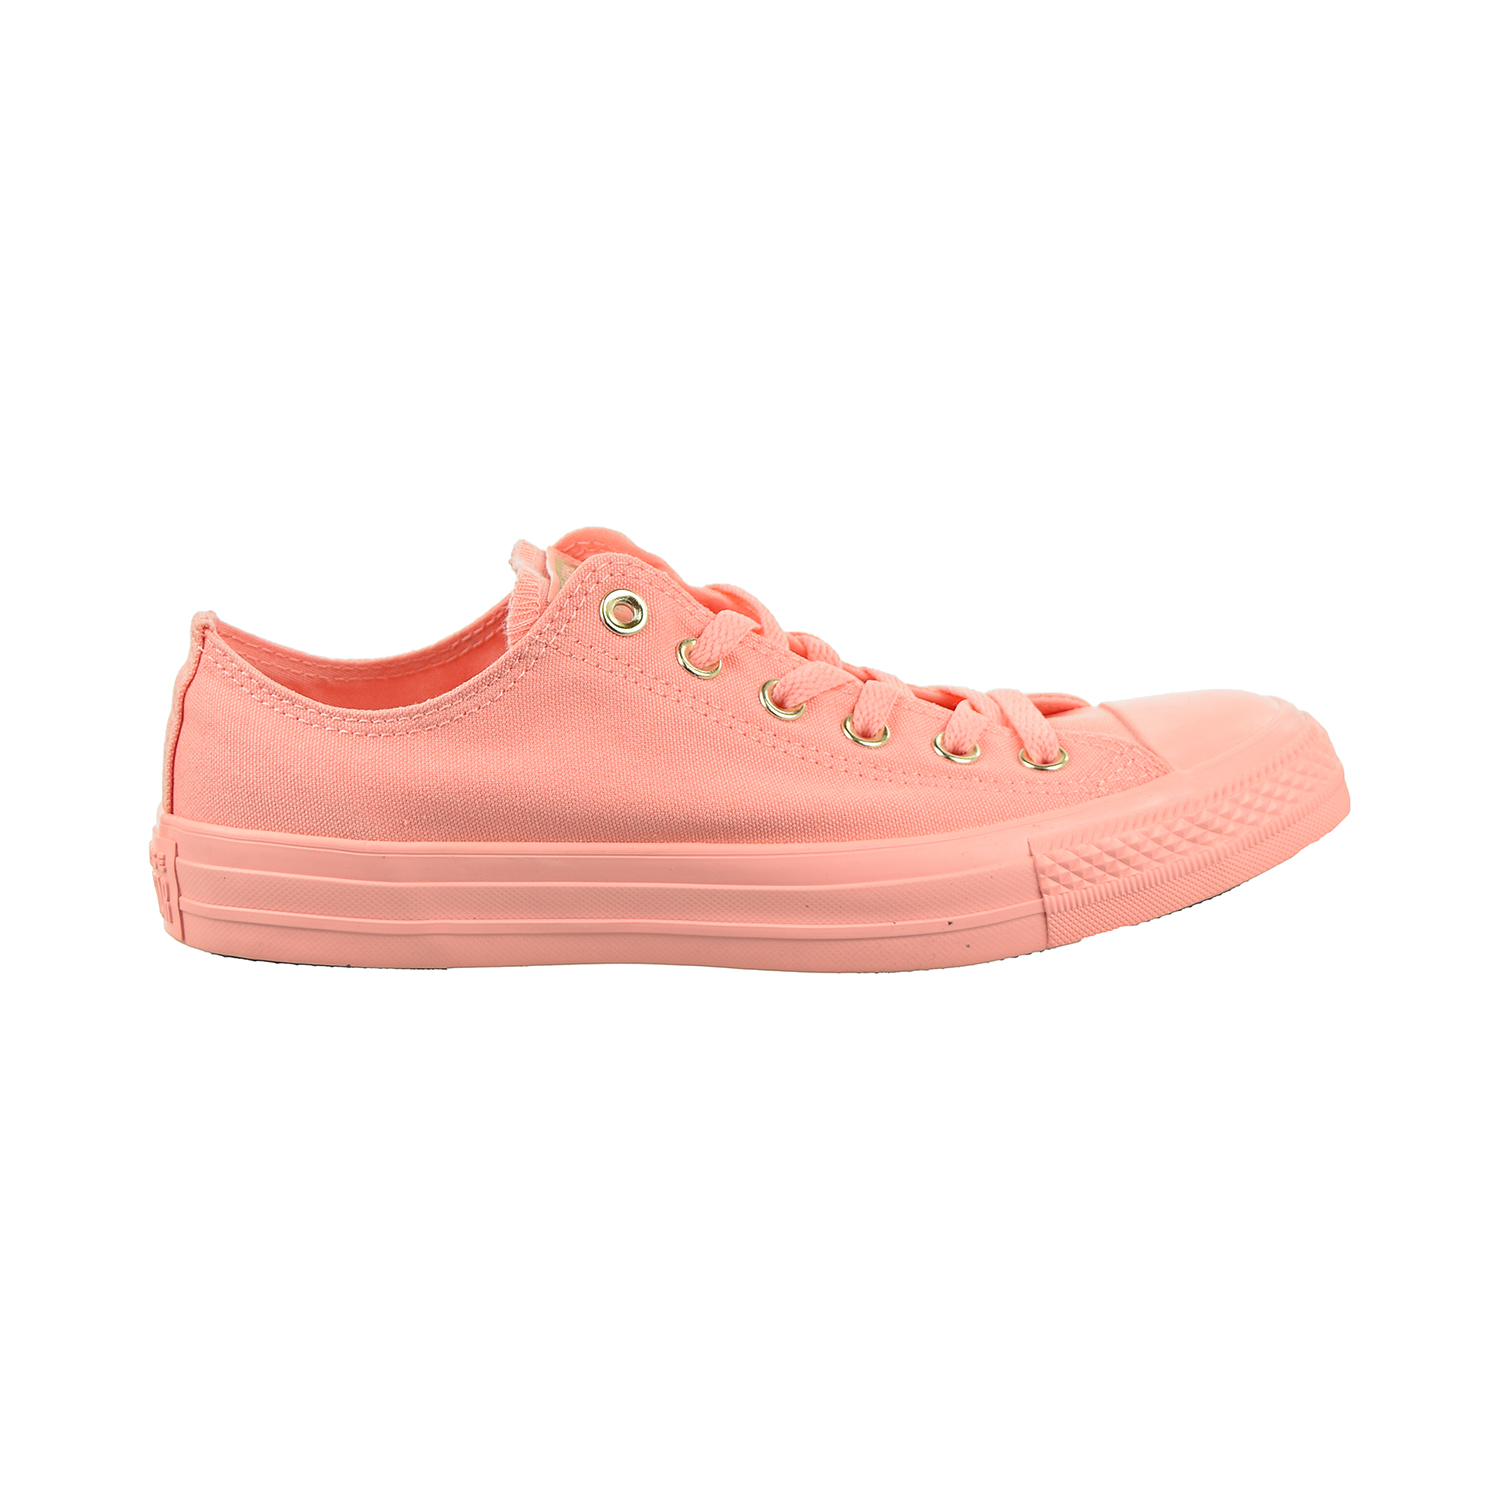 Converse Chuck Taylor All Star OX Womens Shoes Pale Coral-Gold 560683c |  eBay